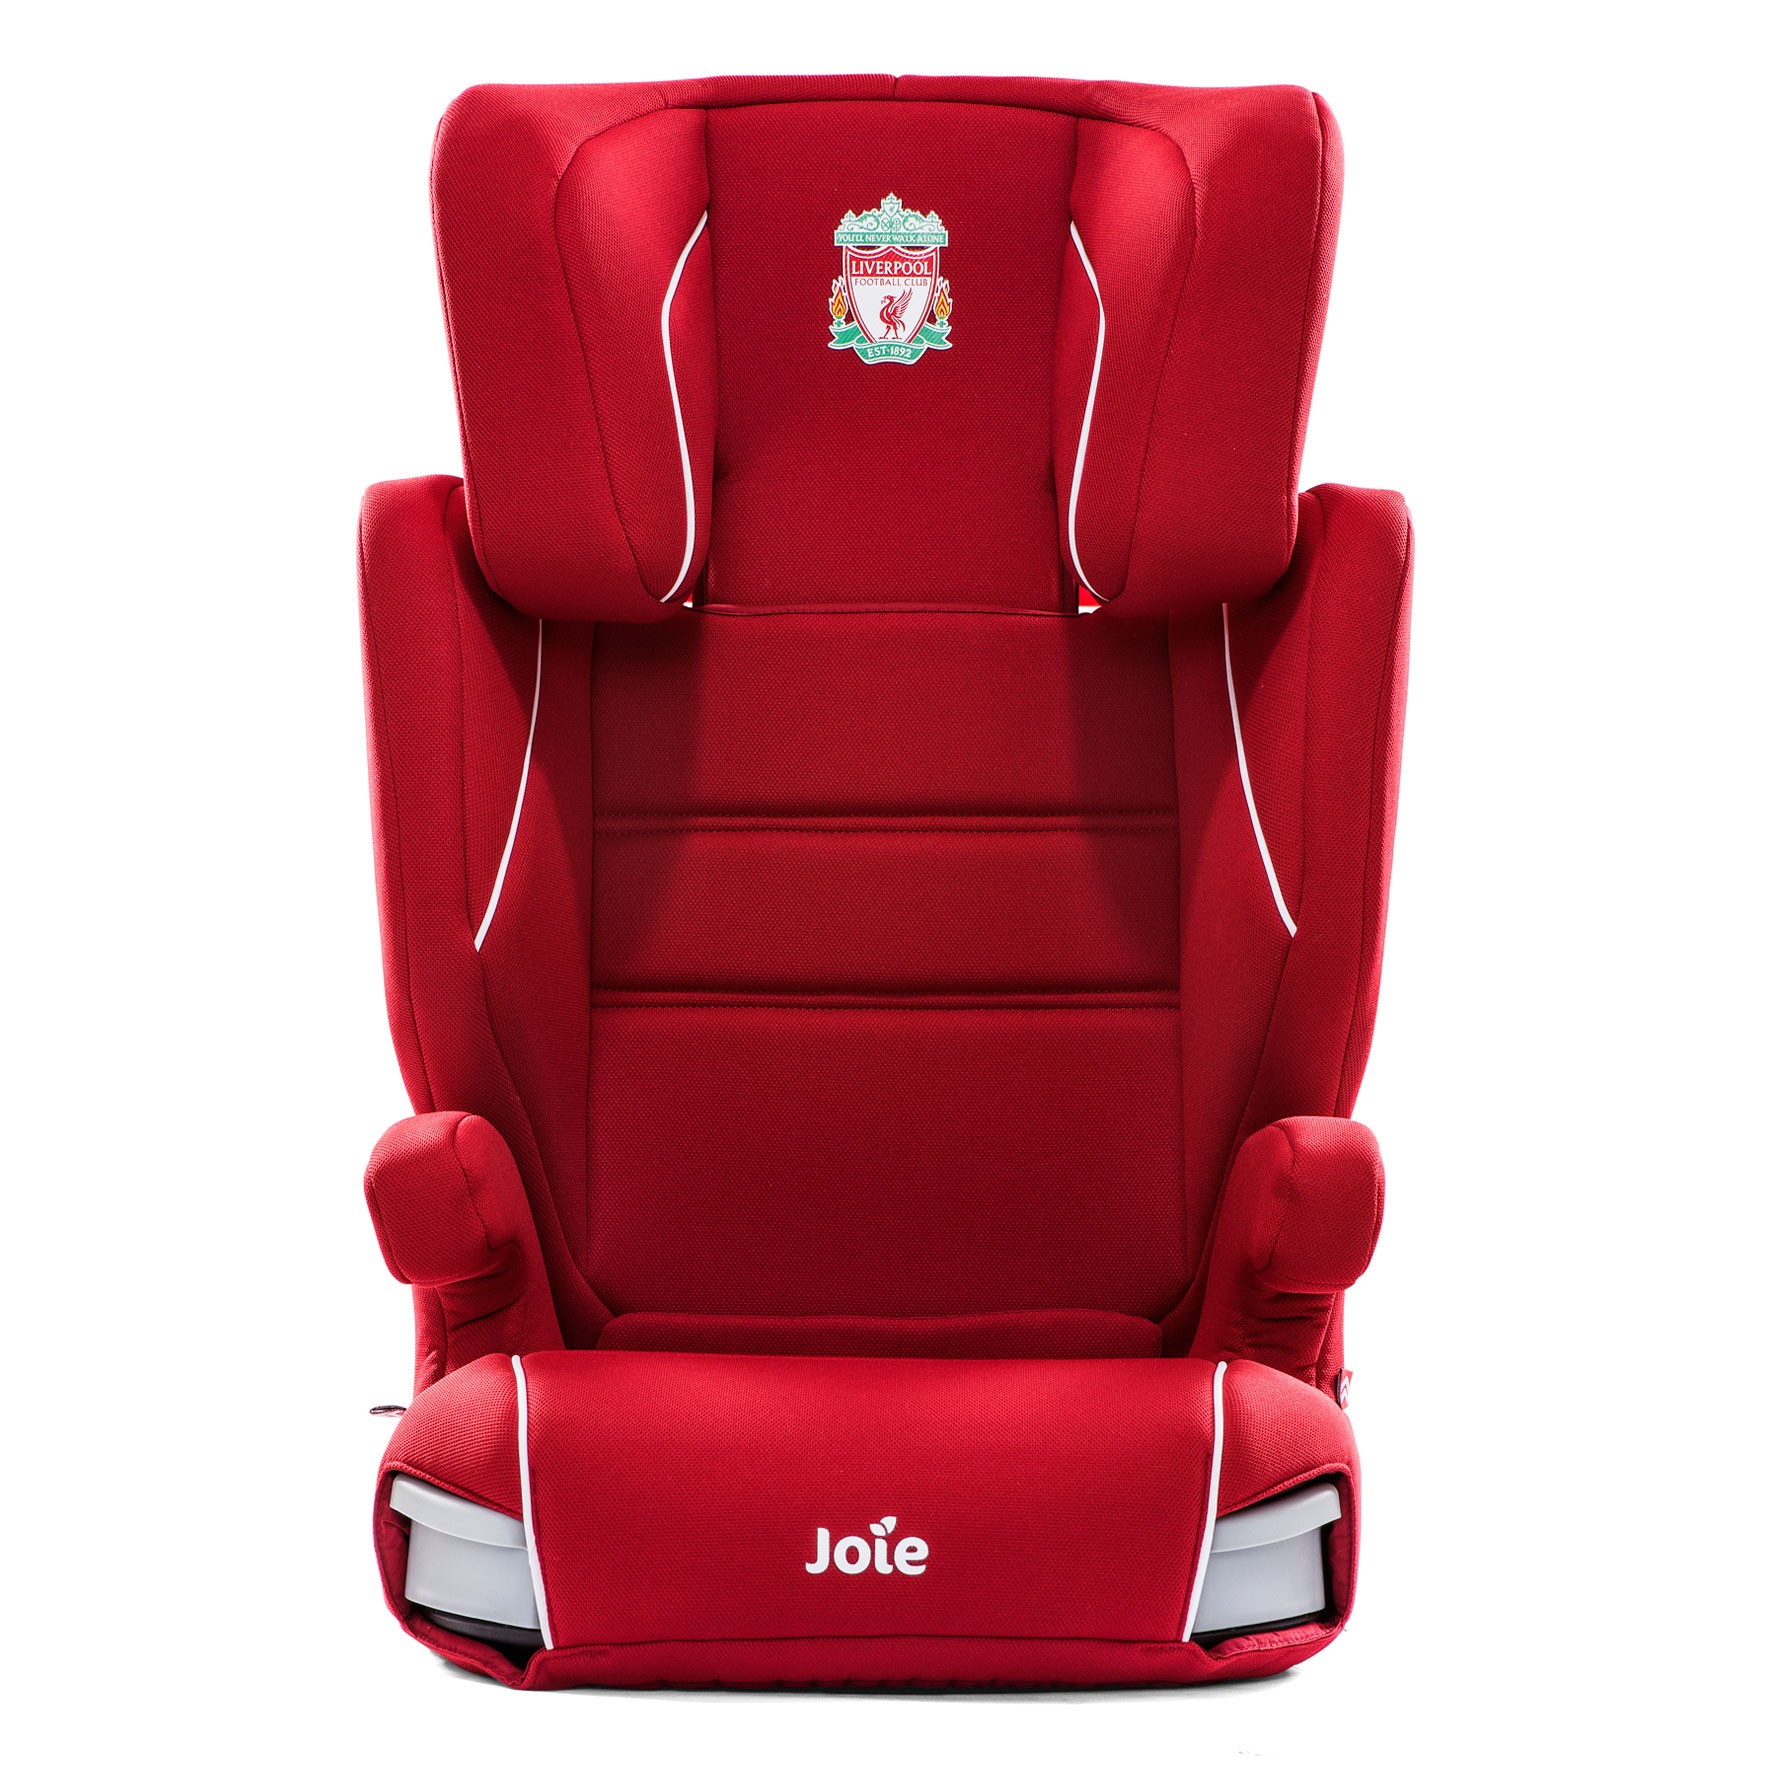 LFC Joie Red Crest Trillo Carseat